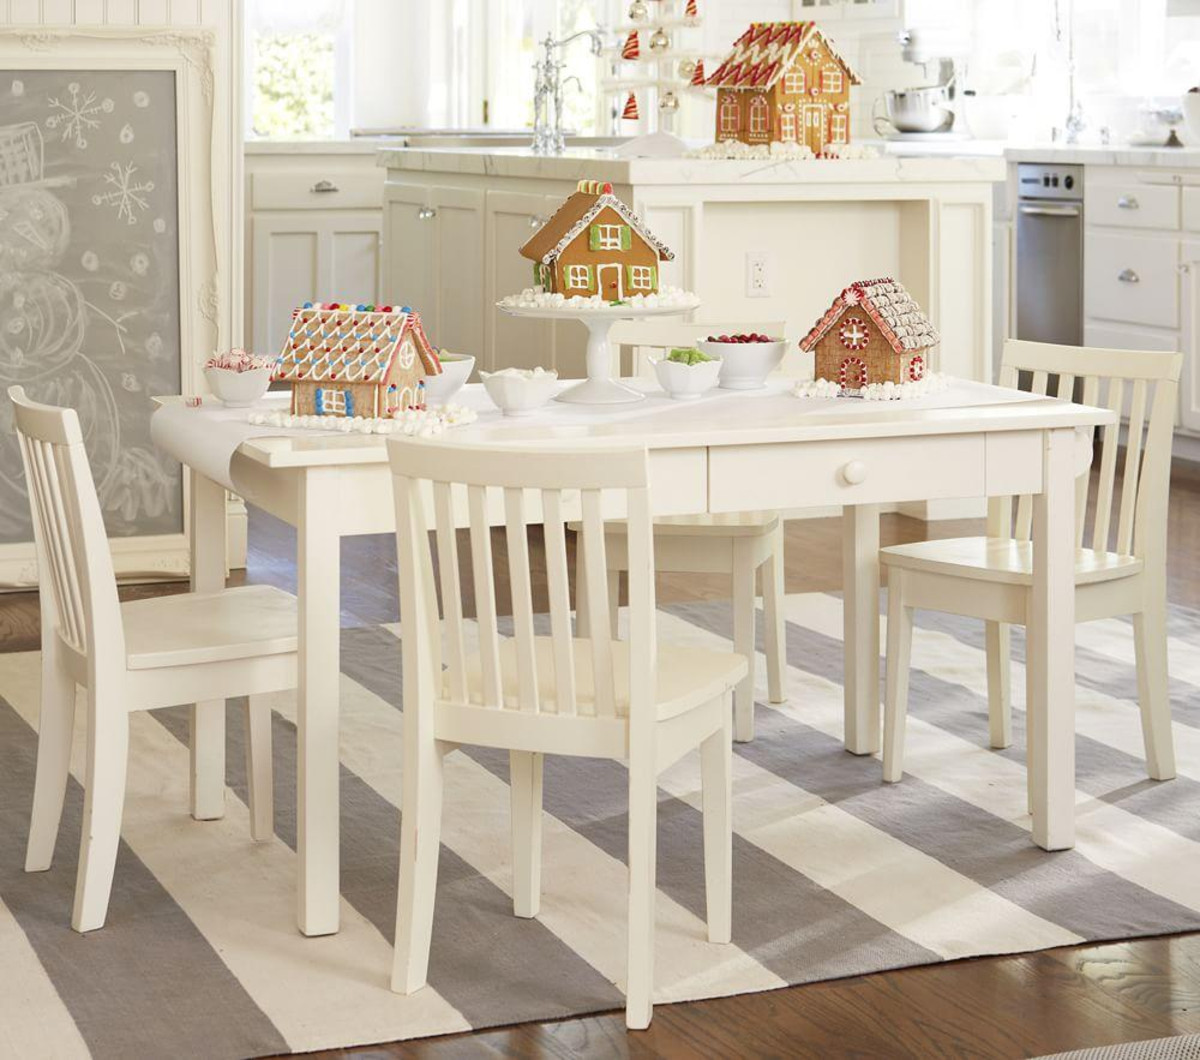 Kids Craft Tables And Chairs
 Carolina Craft Table & 4 Chairs Set